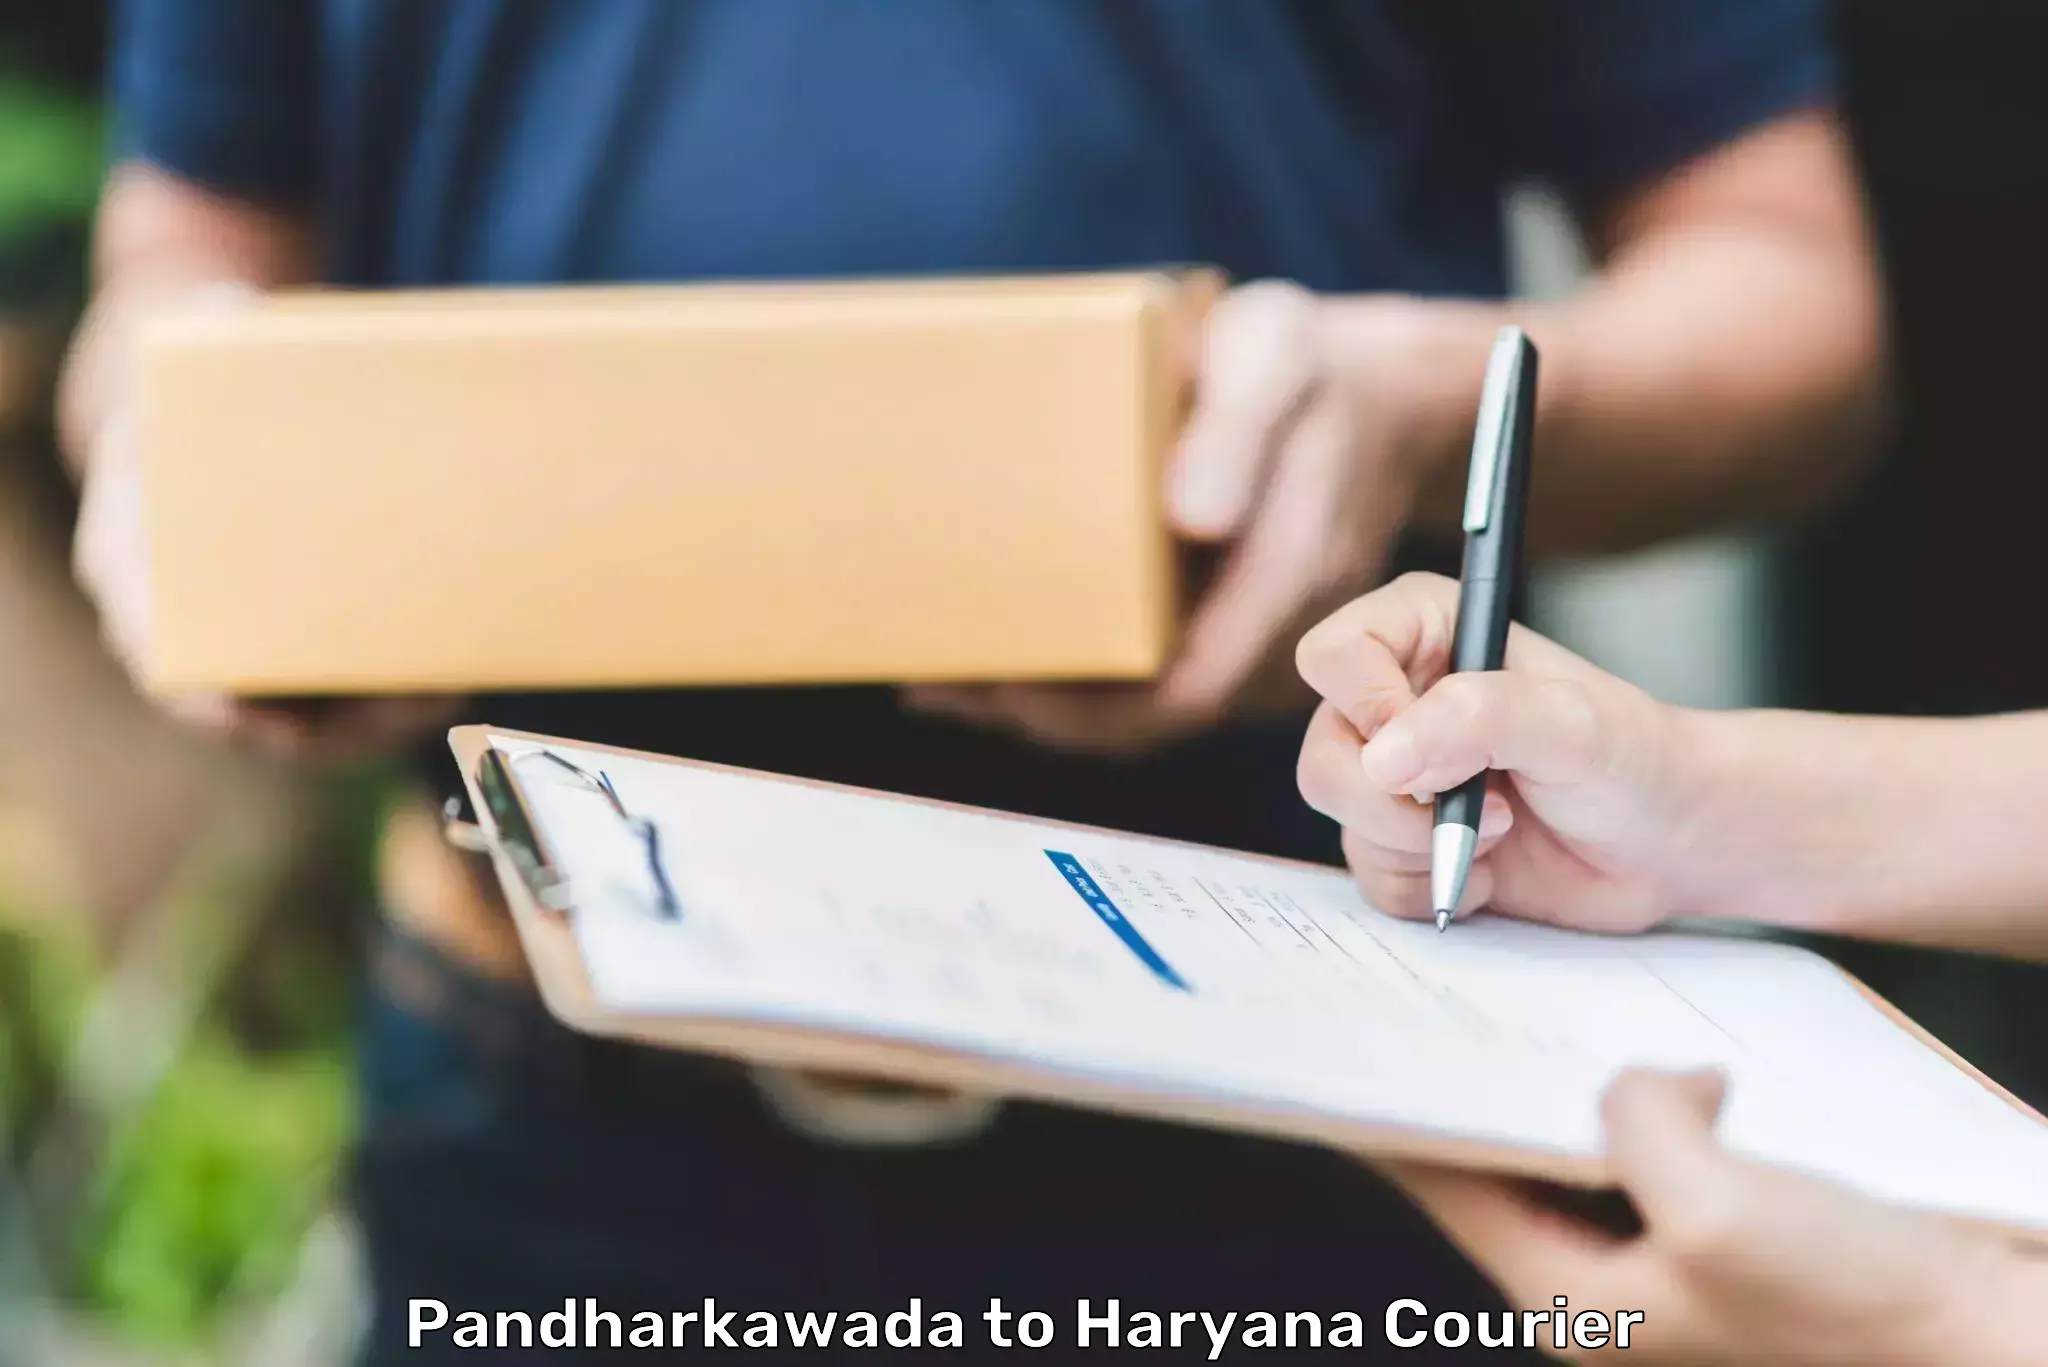 Streamlined delivery processes Pandharkawada to NCR Haryana